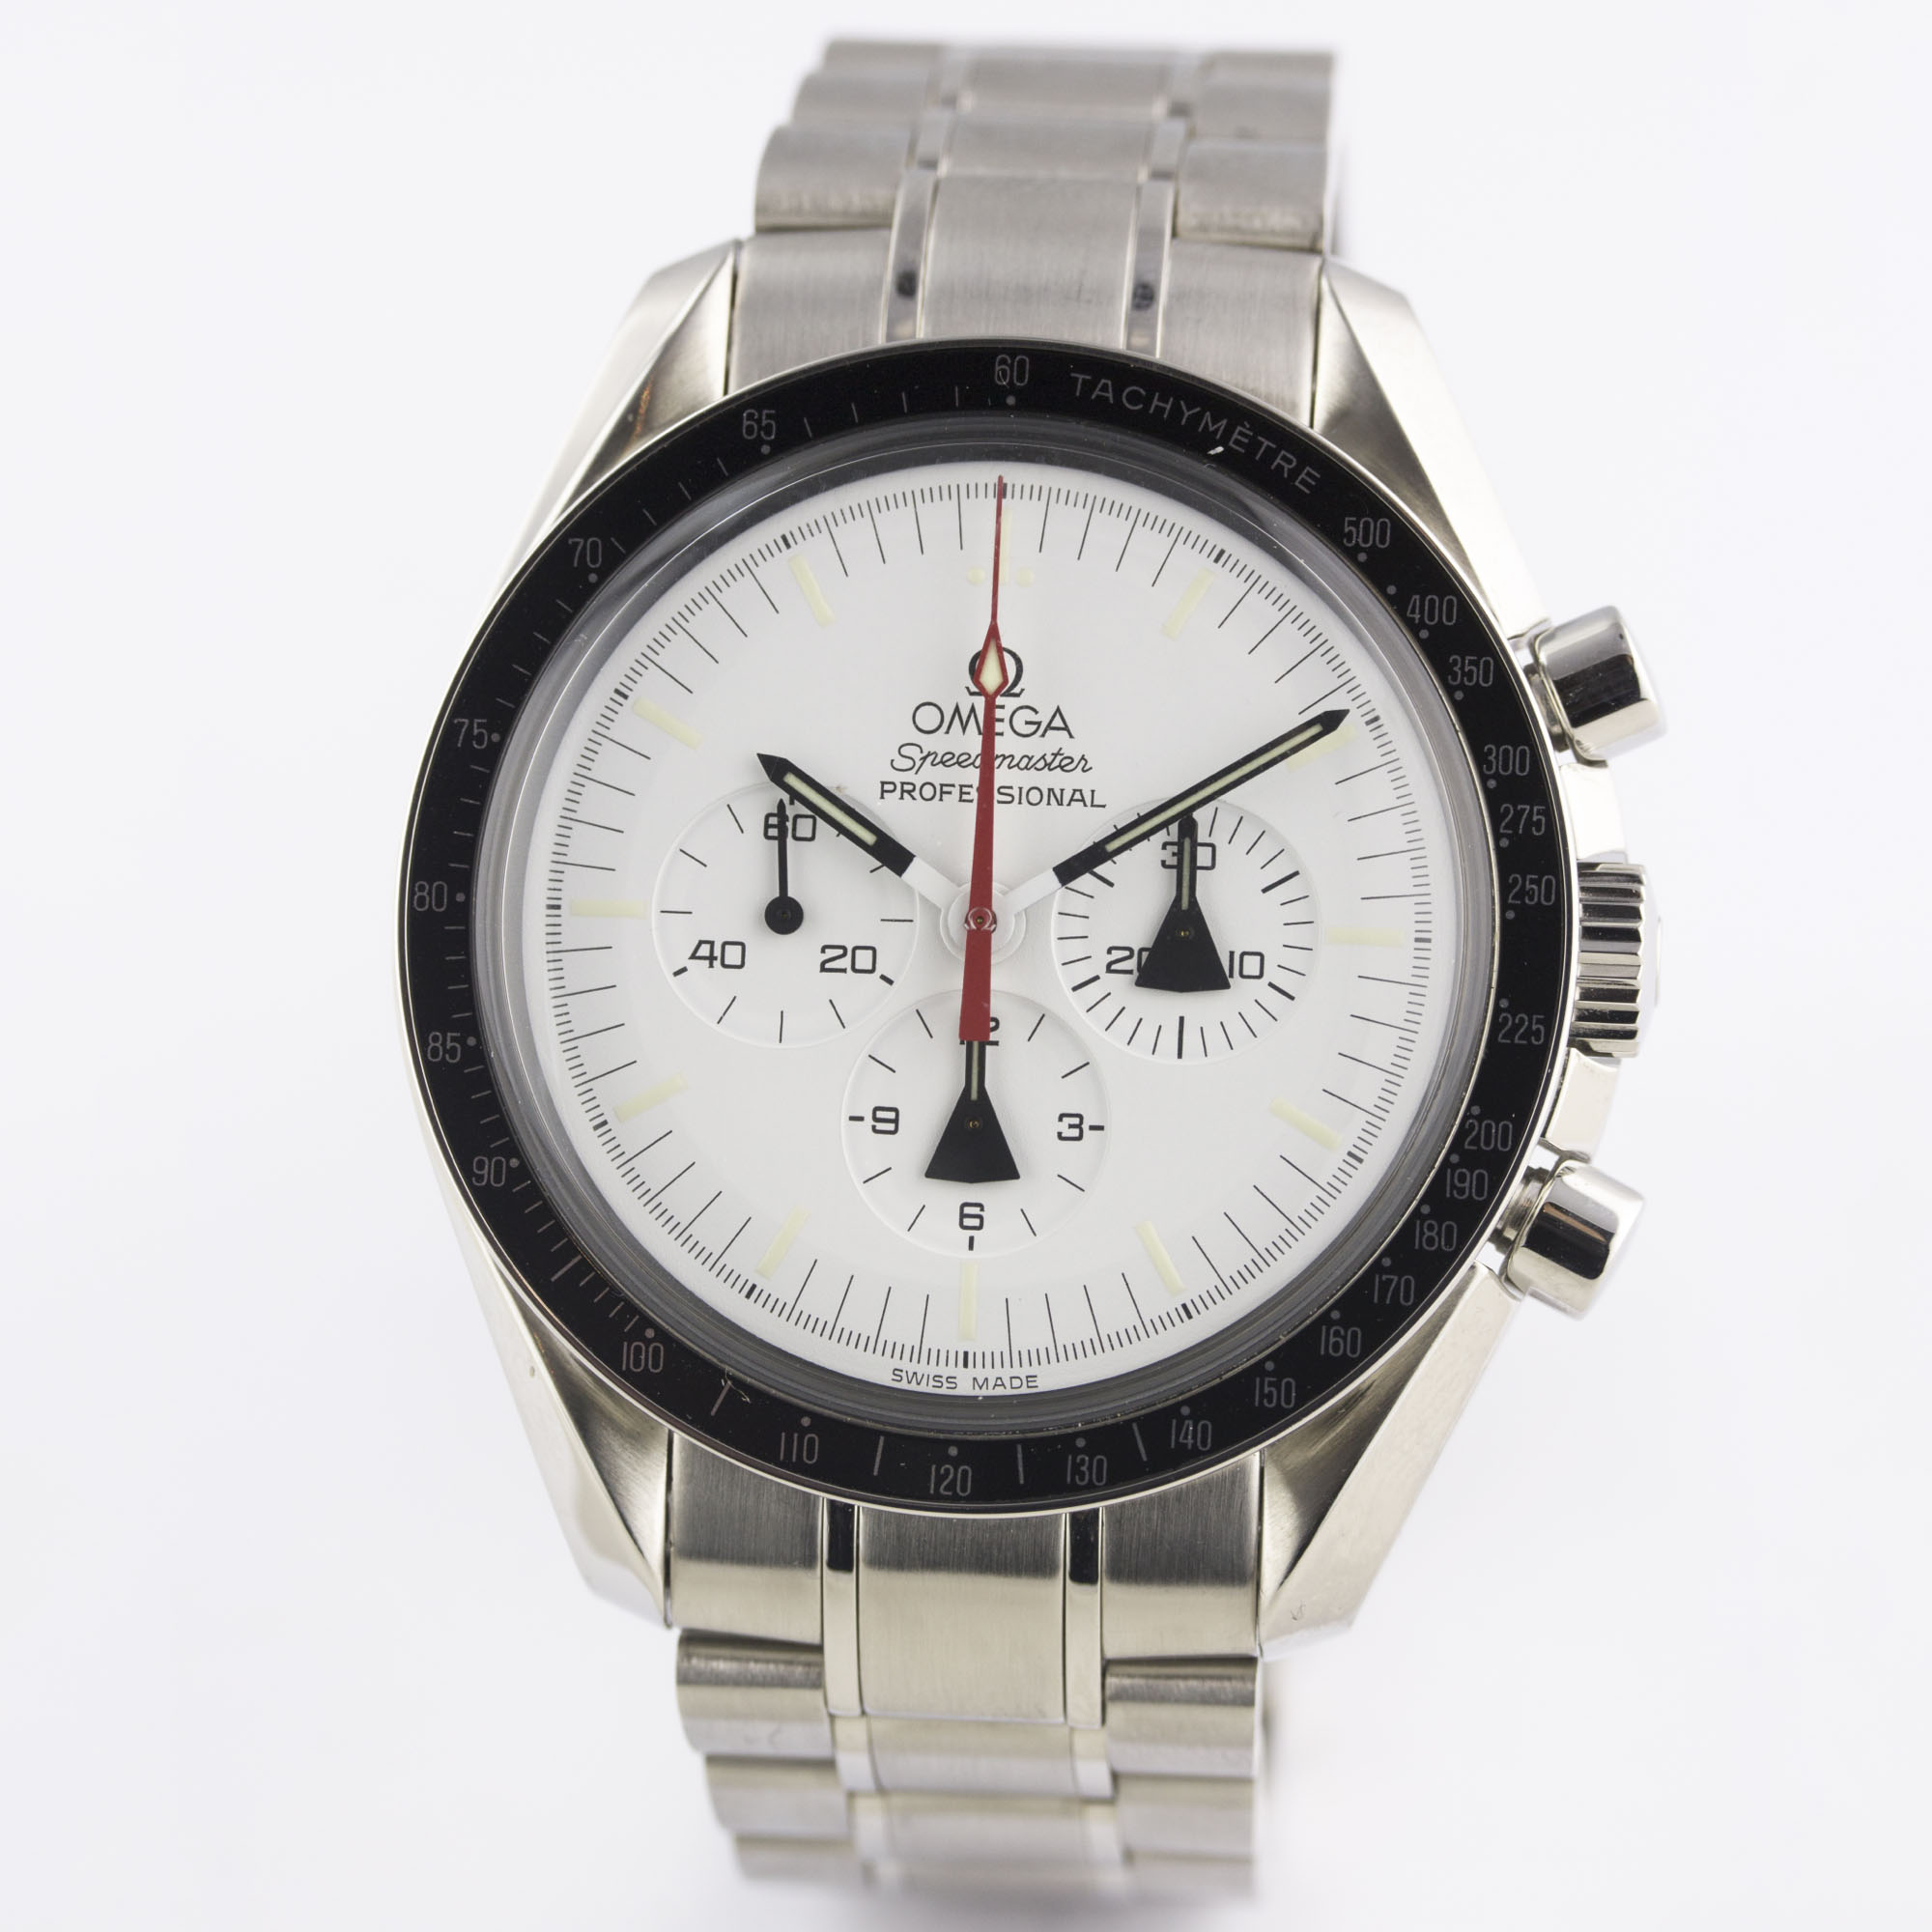 A RARE GENTLEMAN'S STAINLESS STEEL OMEGA SPEEDMASTER PROFESSIONAL "ALASKA PROJECT" CHRONOGRAPH - Image 3 of 10